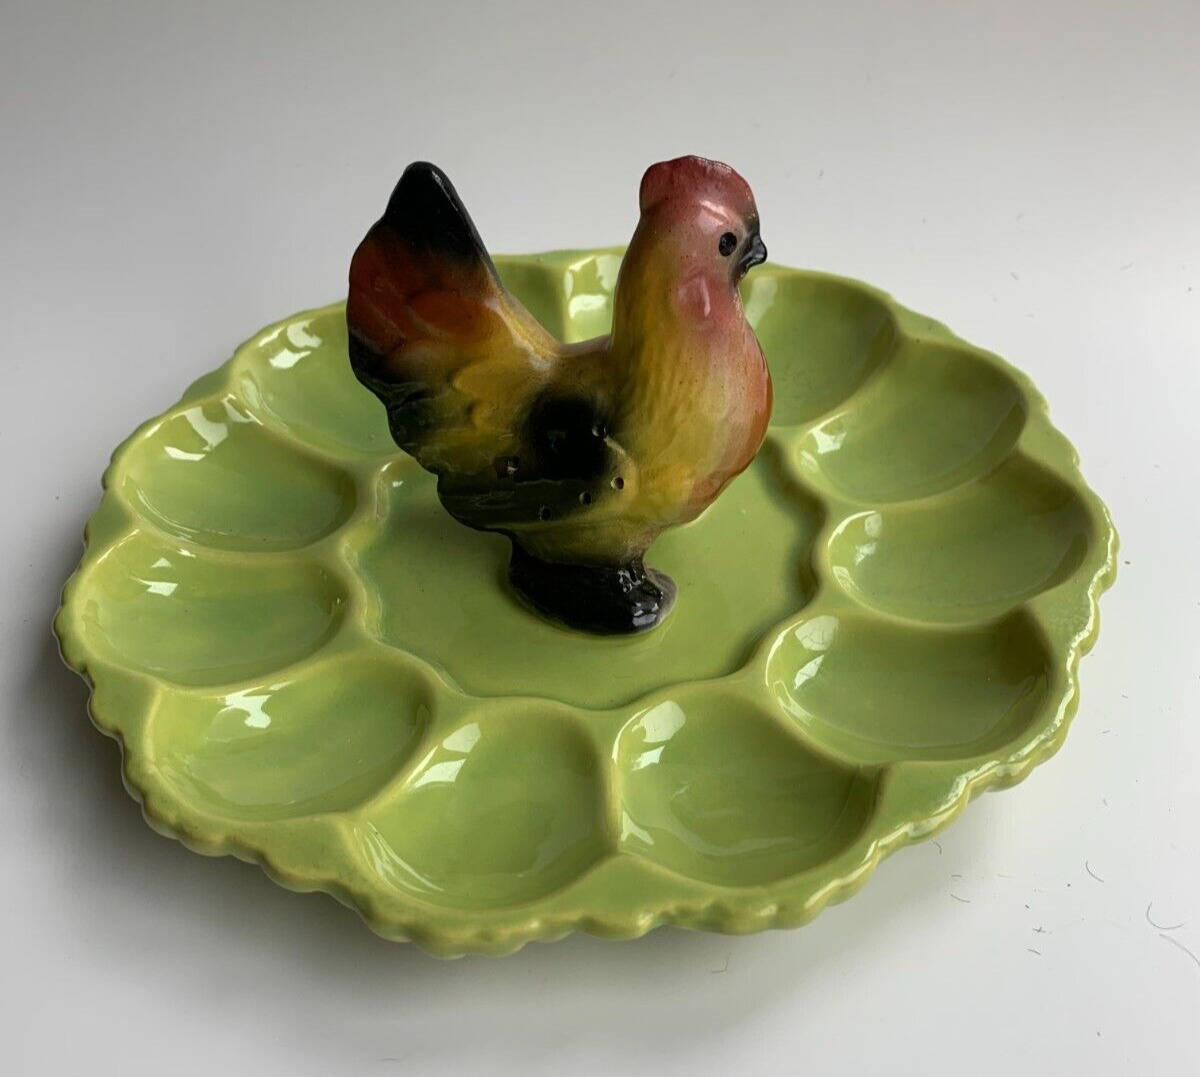 Vintage Bright Yellow/ Green Ceramic Rooster Deviled Egg Dish 9” Round, Easter